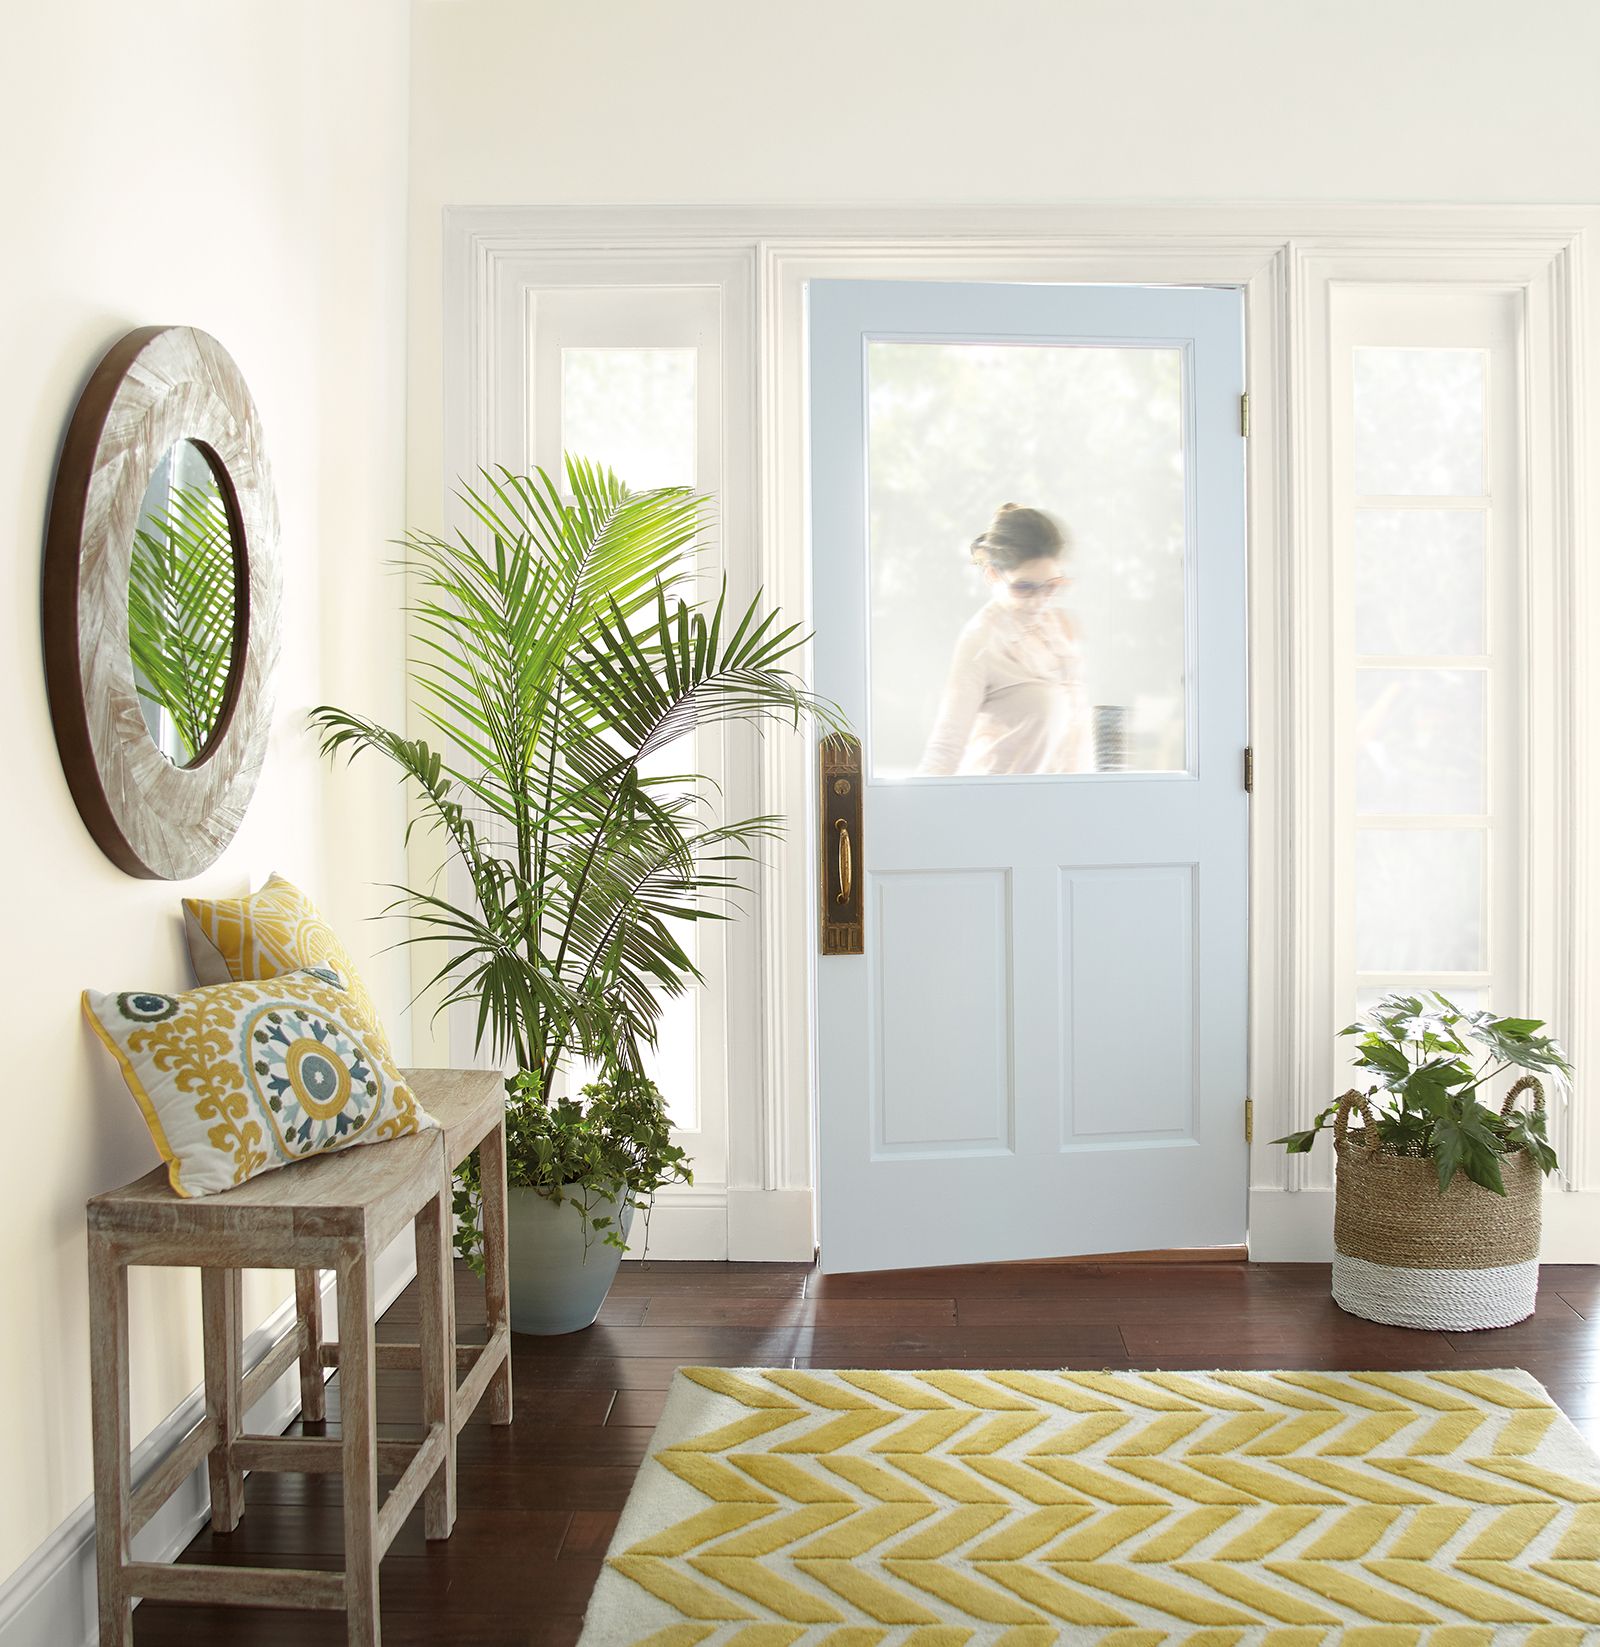 5 Color Trends from Behr's 2020 Report That'll Turn Any Room into